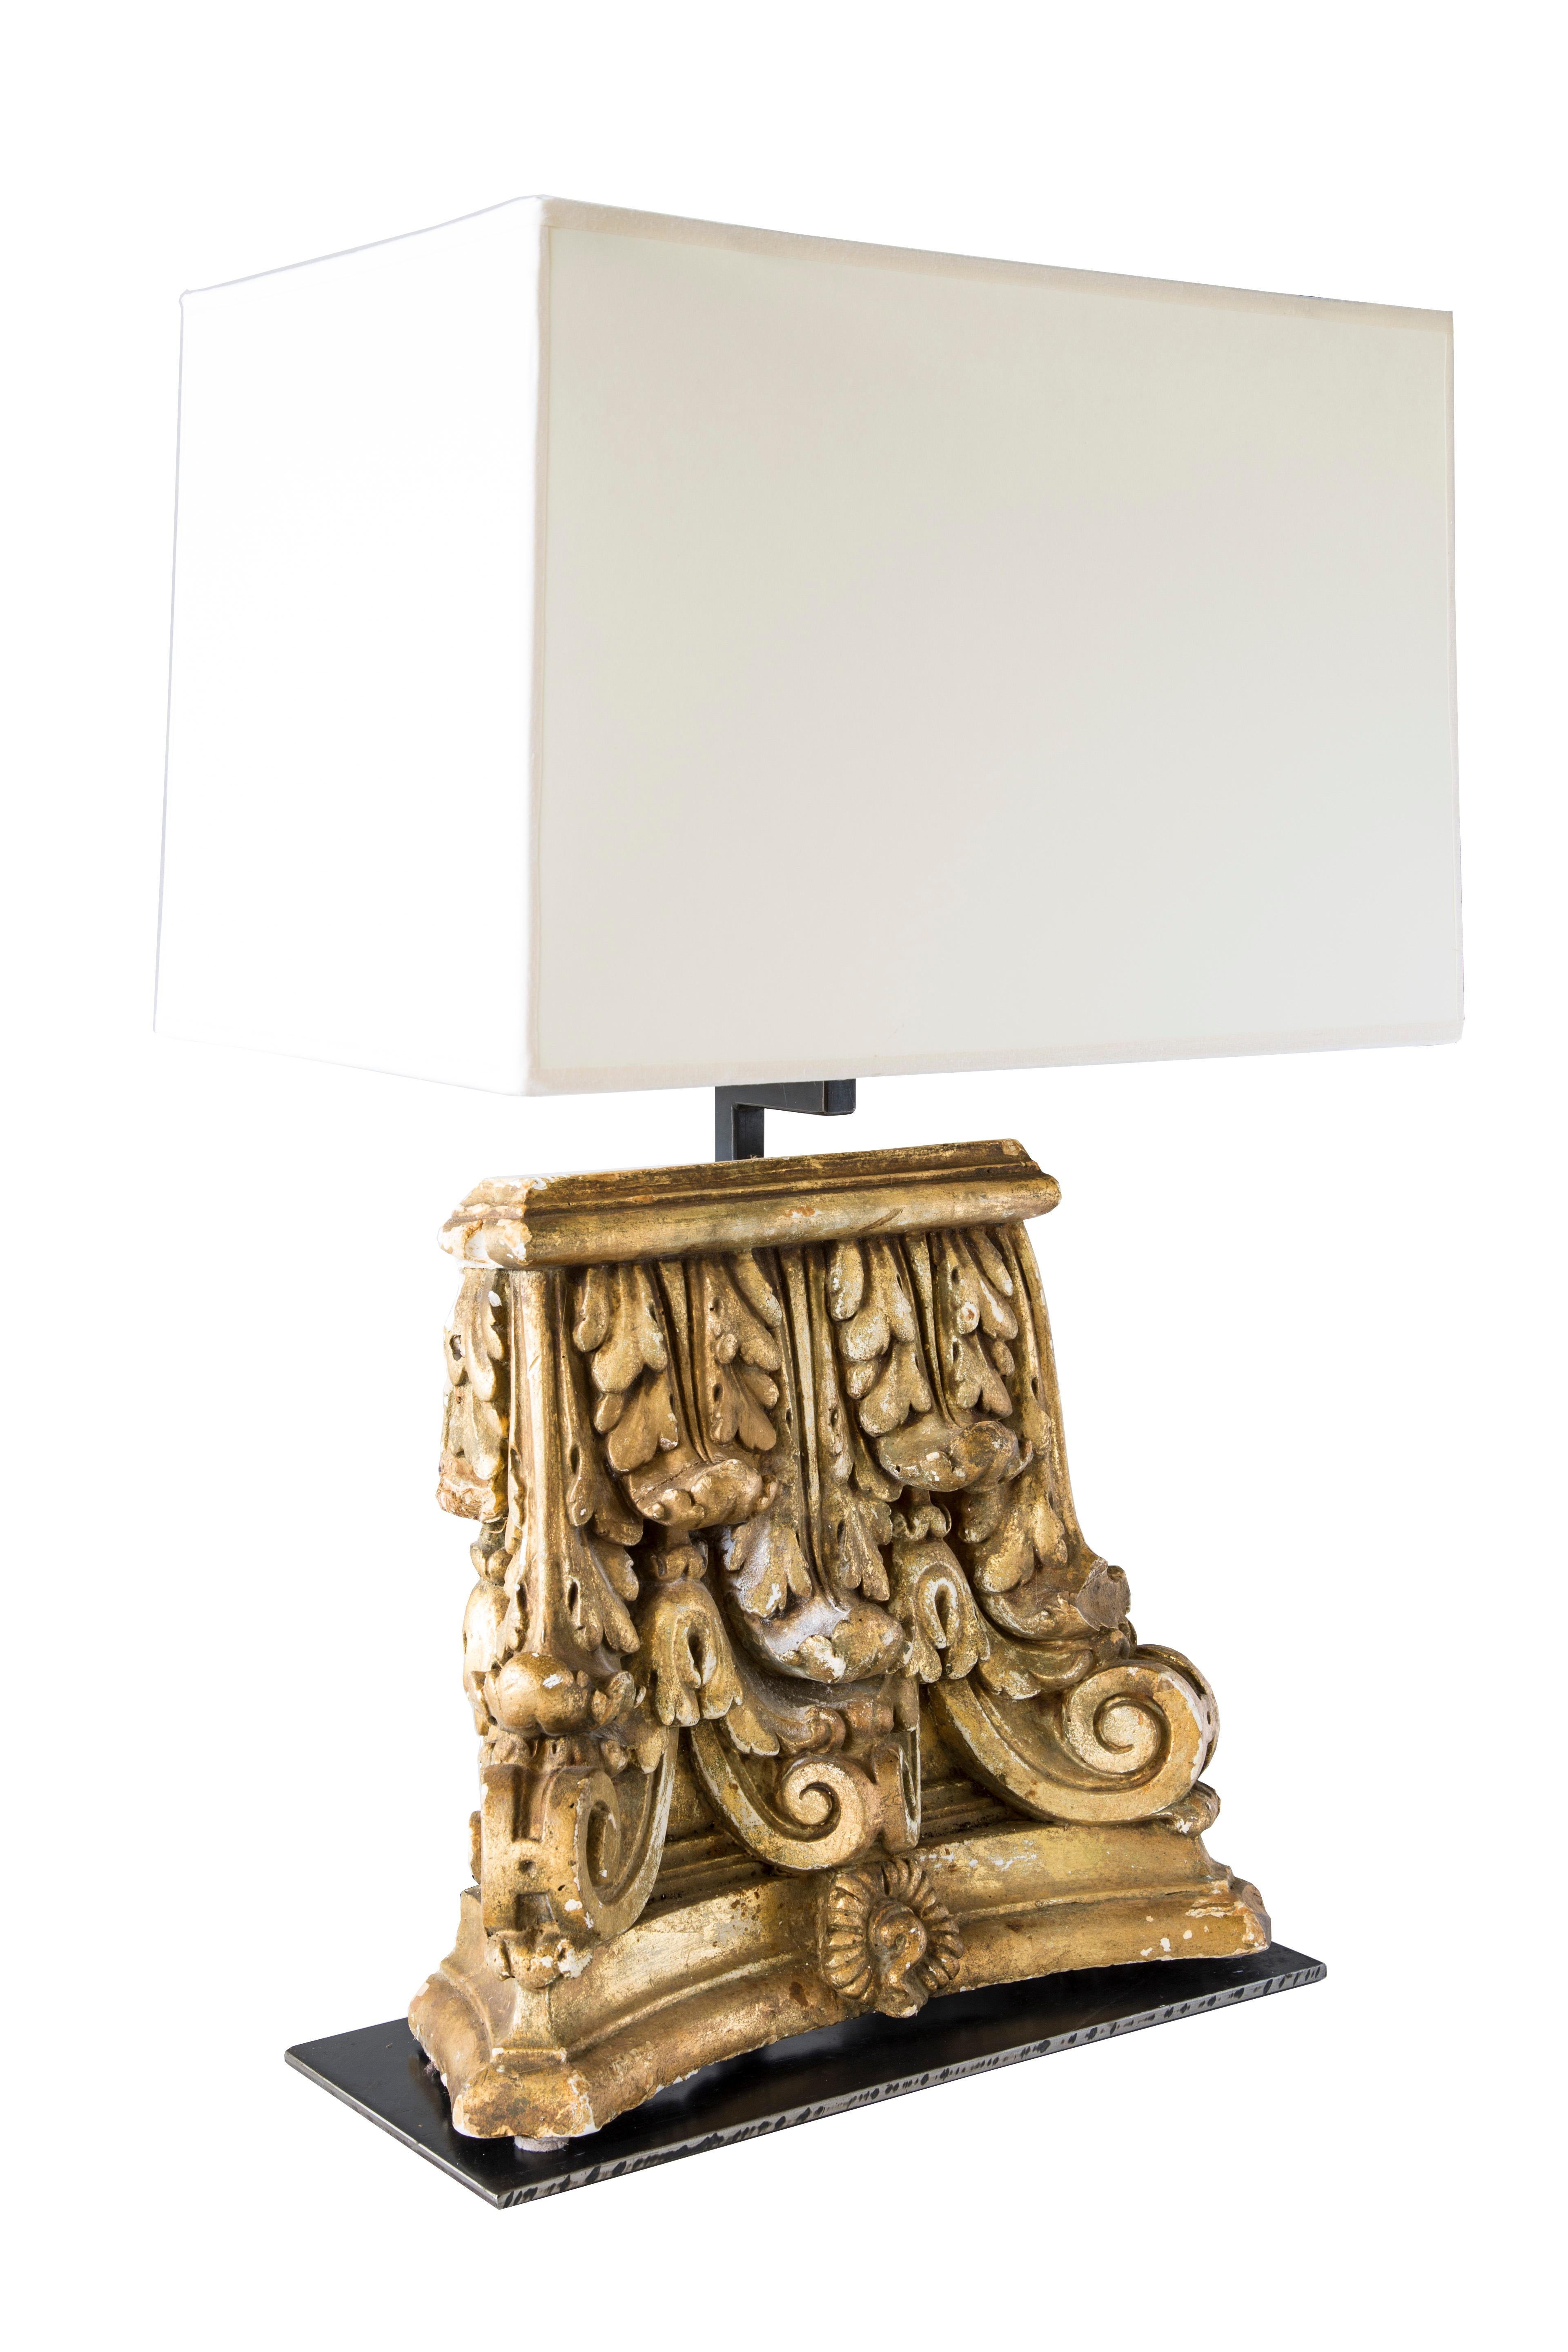 Custom table lamp with gilded capitol fragments.